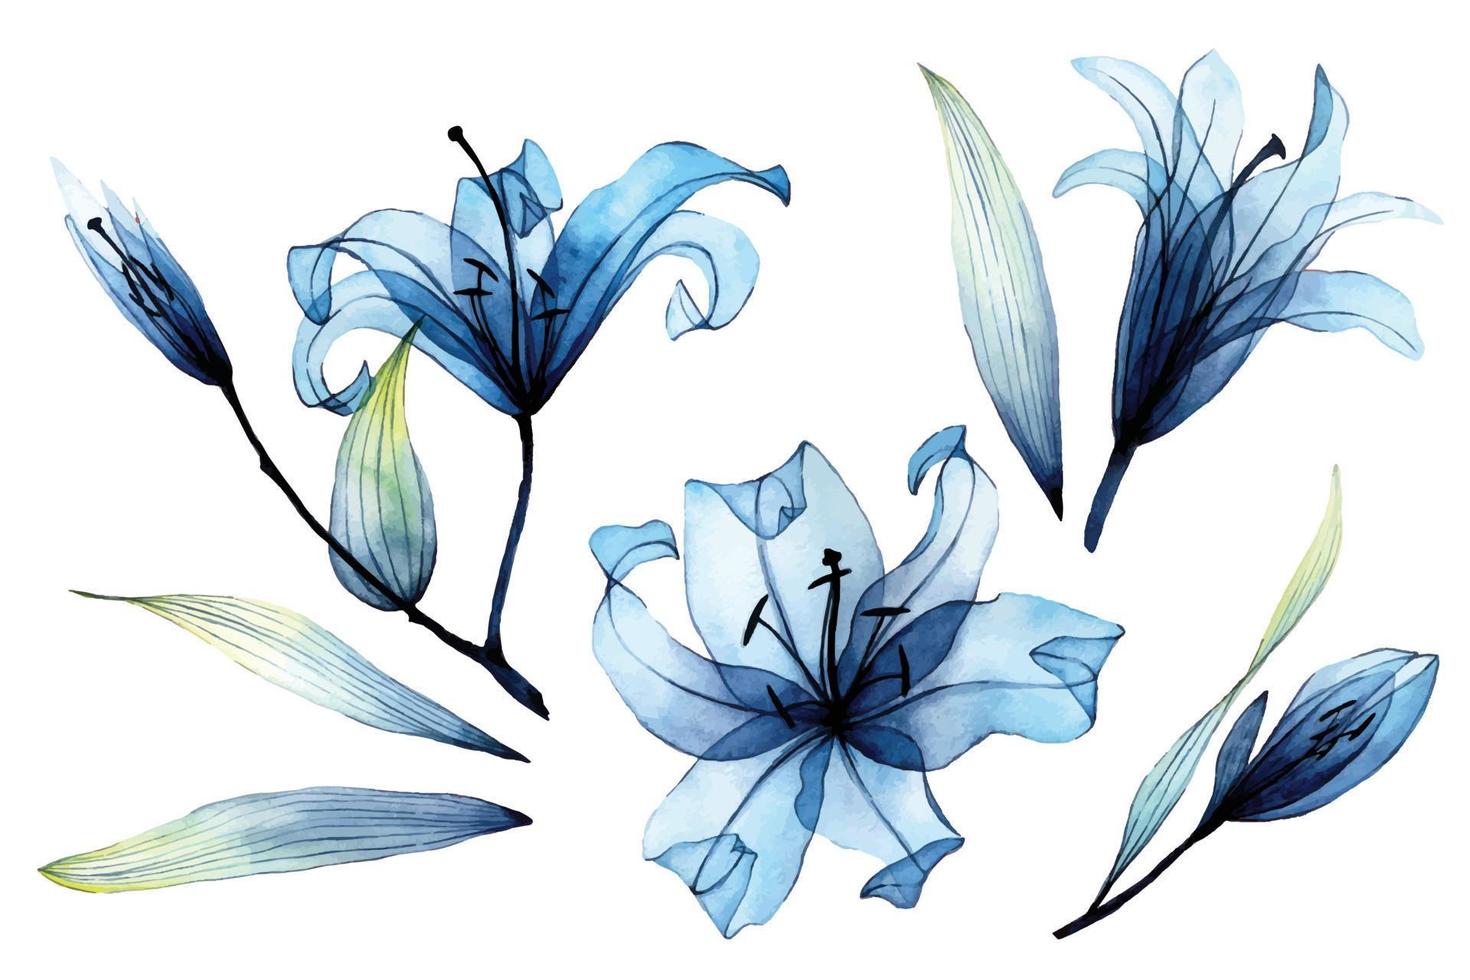 watercolor set with transparent flowers and leaves. transparent blue lilies in pastel colors. elements isolated on white background. design for wedding vector